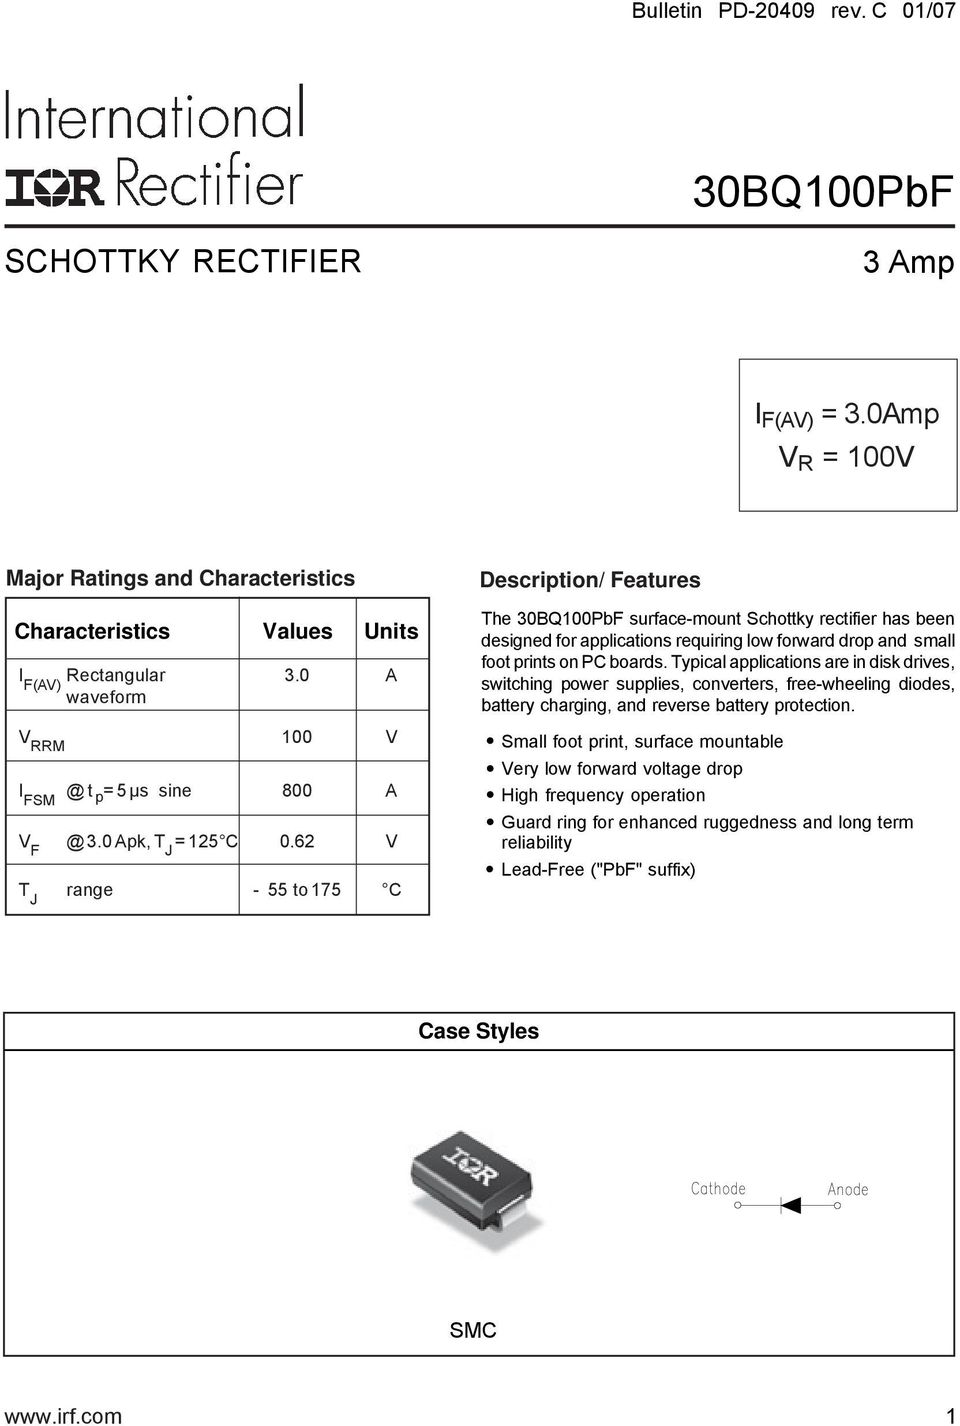 62 V T range - 55 to 75 C Description/ Features The 30BQ00PbF surface-mount Schottky rectifier has been designed for applications requiring low forward drop and small foot prints on PC